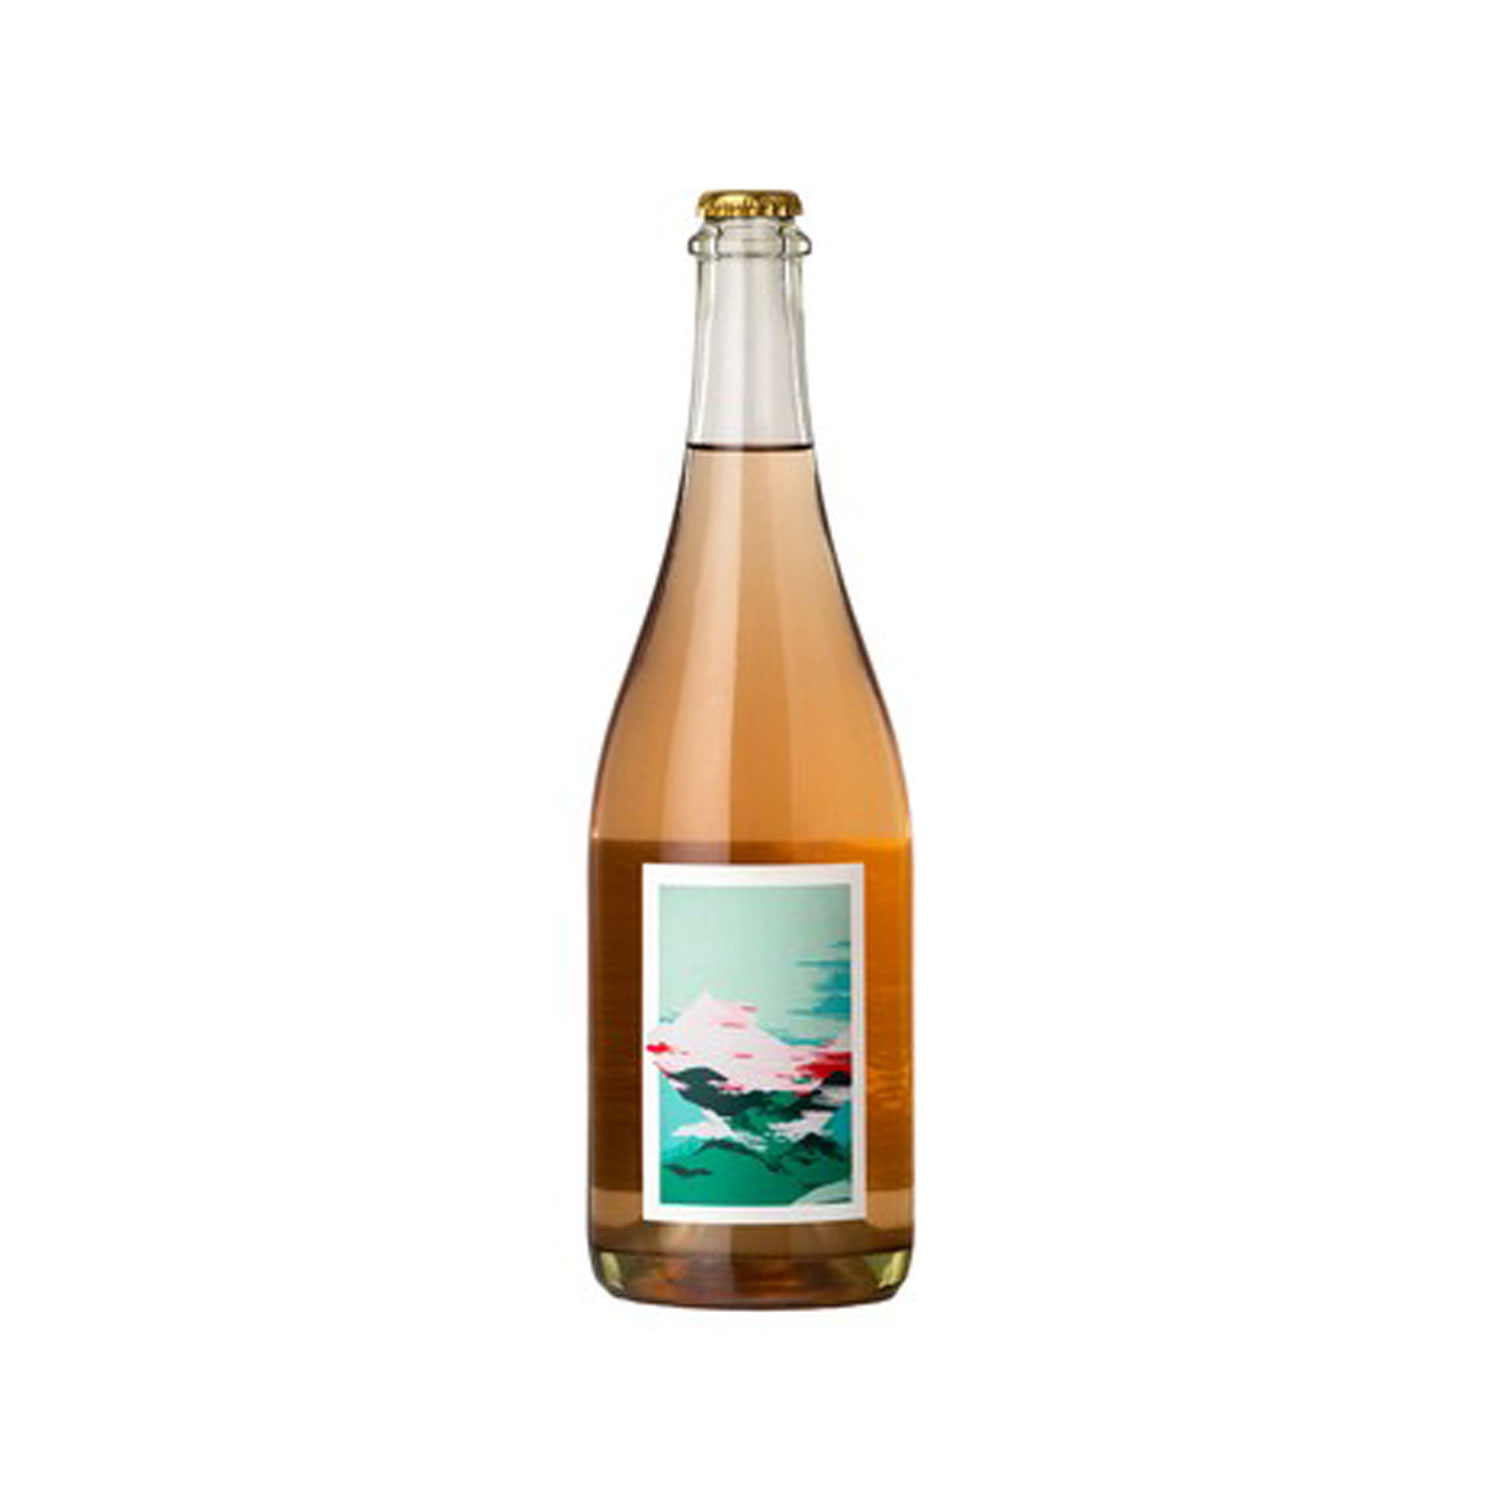 “YAMA” SPARKLING WINE BY DIVISION WINEMAKING CO.